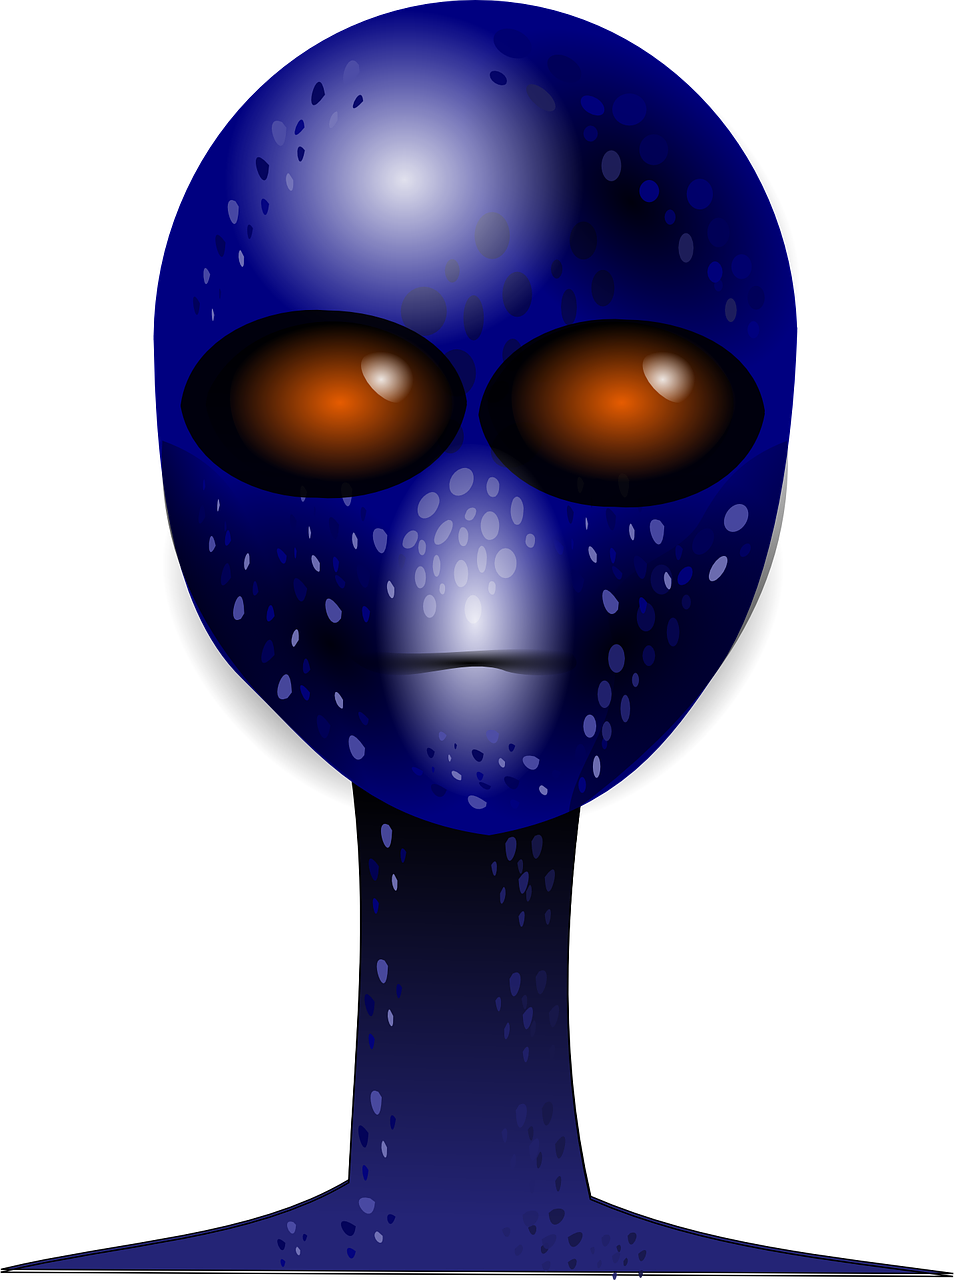 alien,face,ufo,head,monster,invasion,free vector graphics,free pictures, free photos, free images, royalty free, free illustrations, public domain